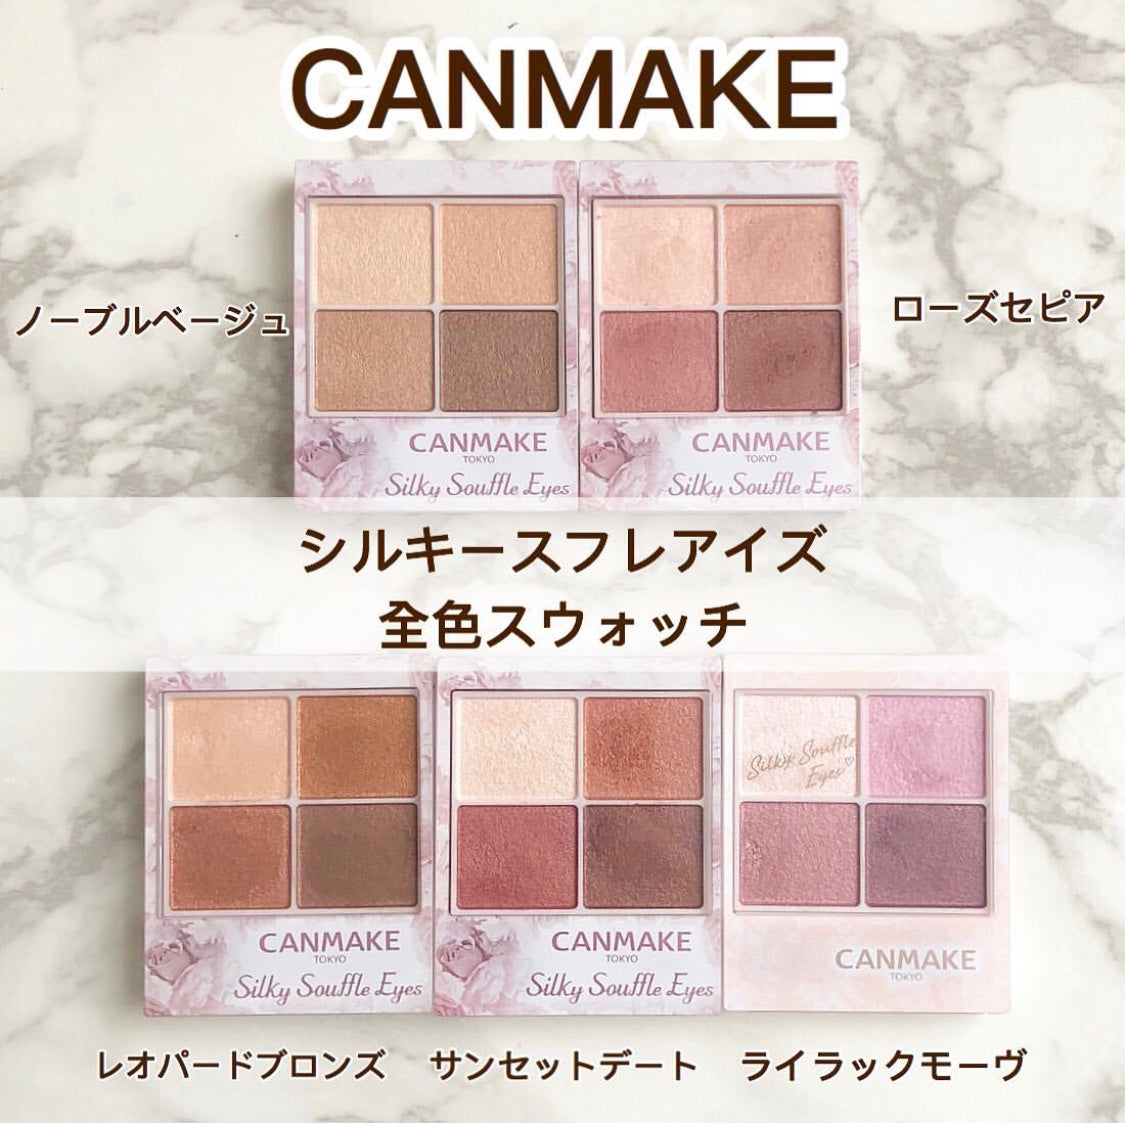 CANMAKE Silky Souffle Eyes(1-7色)  舒芙蕾四色眼影 キャンメイク シルキースフレアイズ